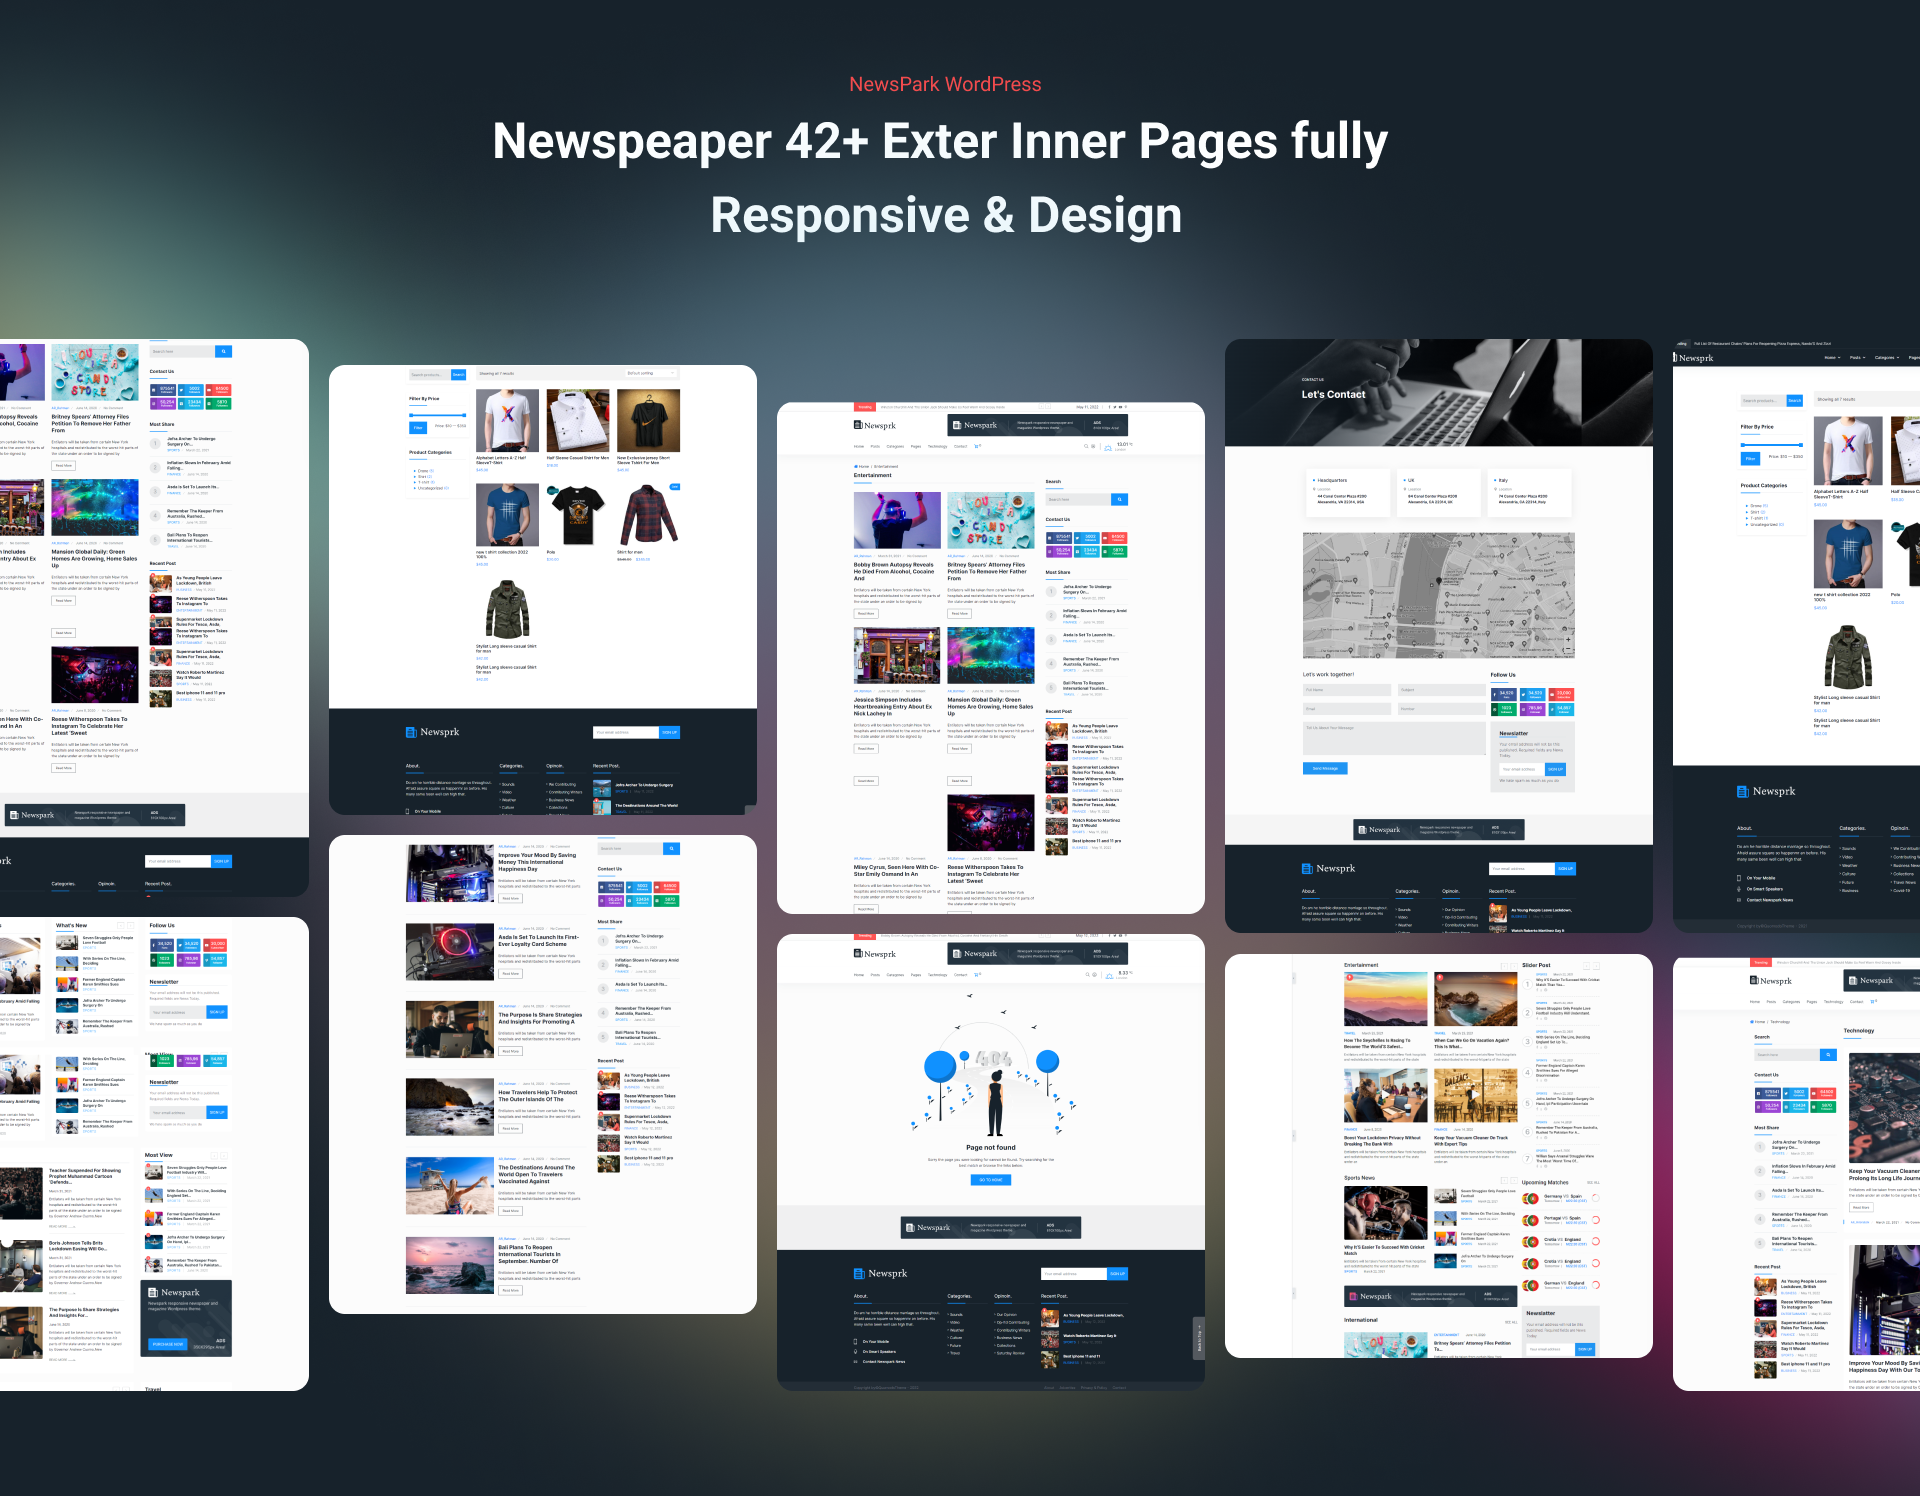 Newspaper exter and inner pages are fully responsive.